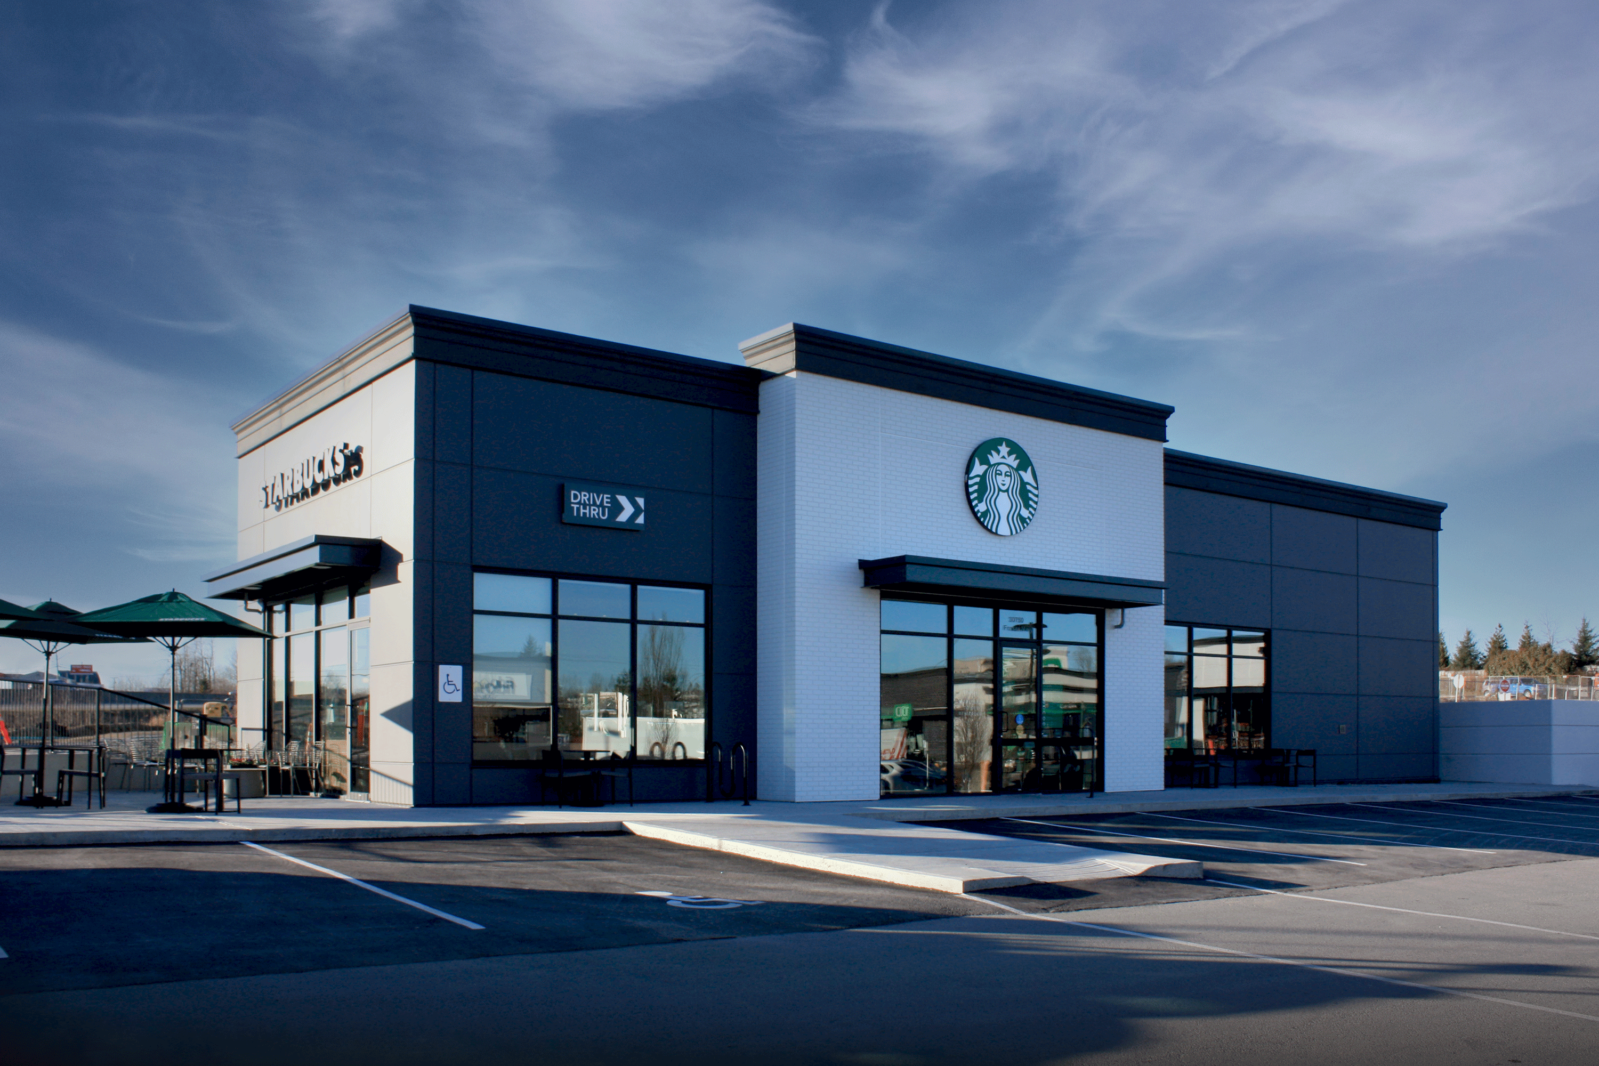 Starbucks Cafe located at 30750 Fraser Hwy, Abbotsford, BC